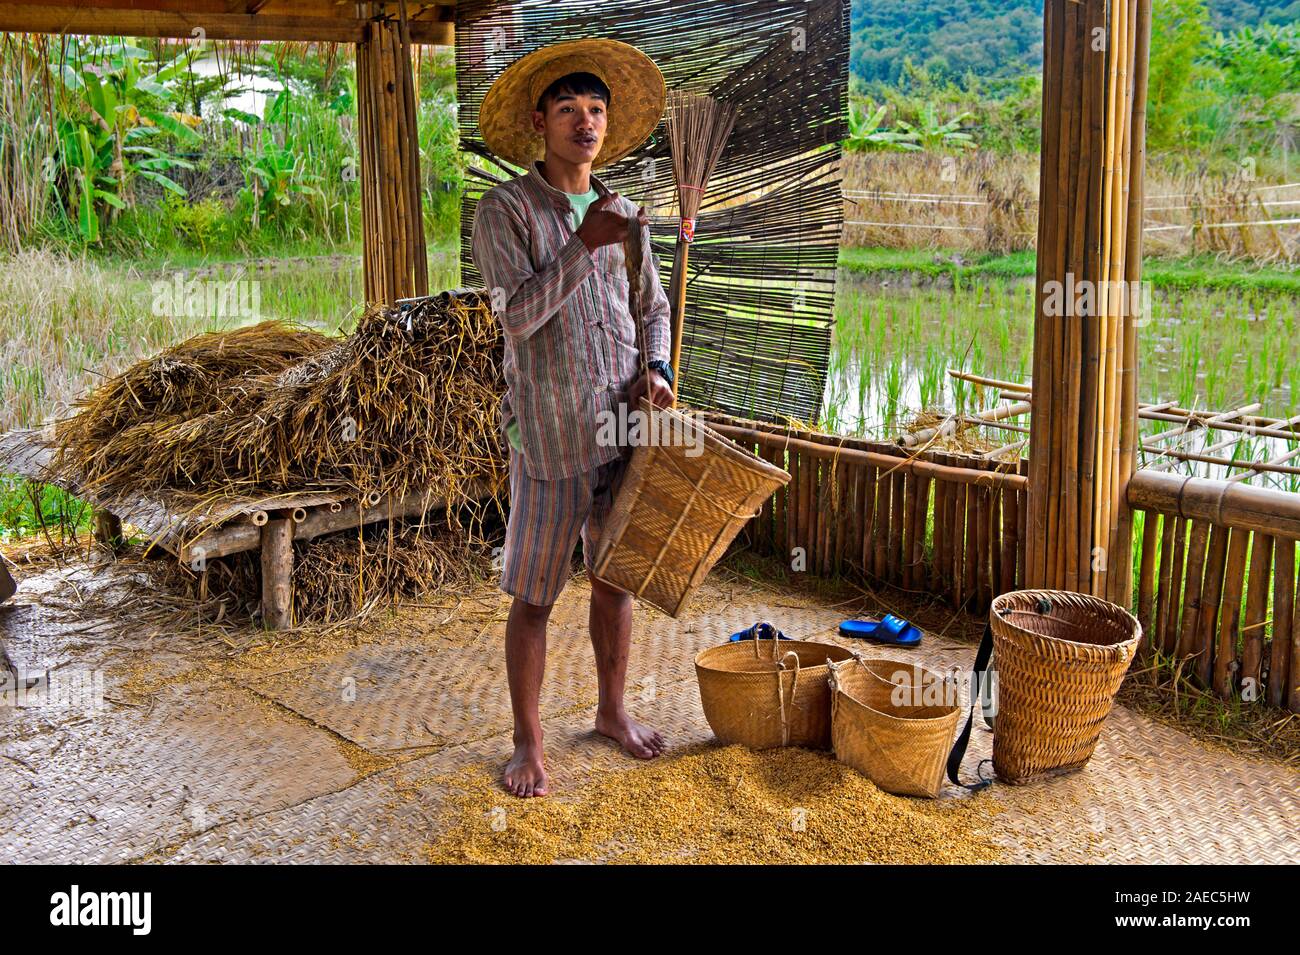 Young manshowing baskets for storage and transportation of rice, demonstration of traditional rice producing technology, Luang Prabang, Laos Stock Photo